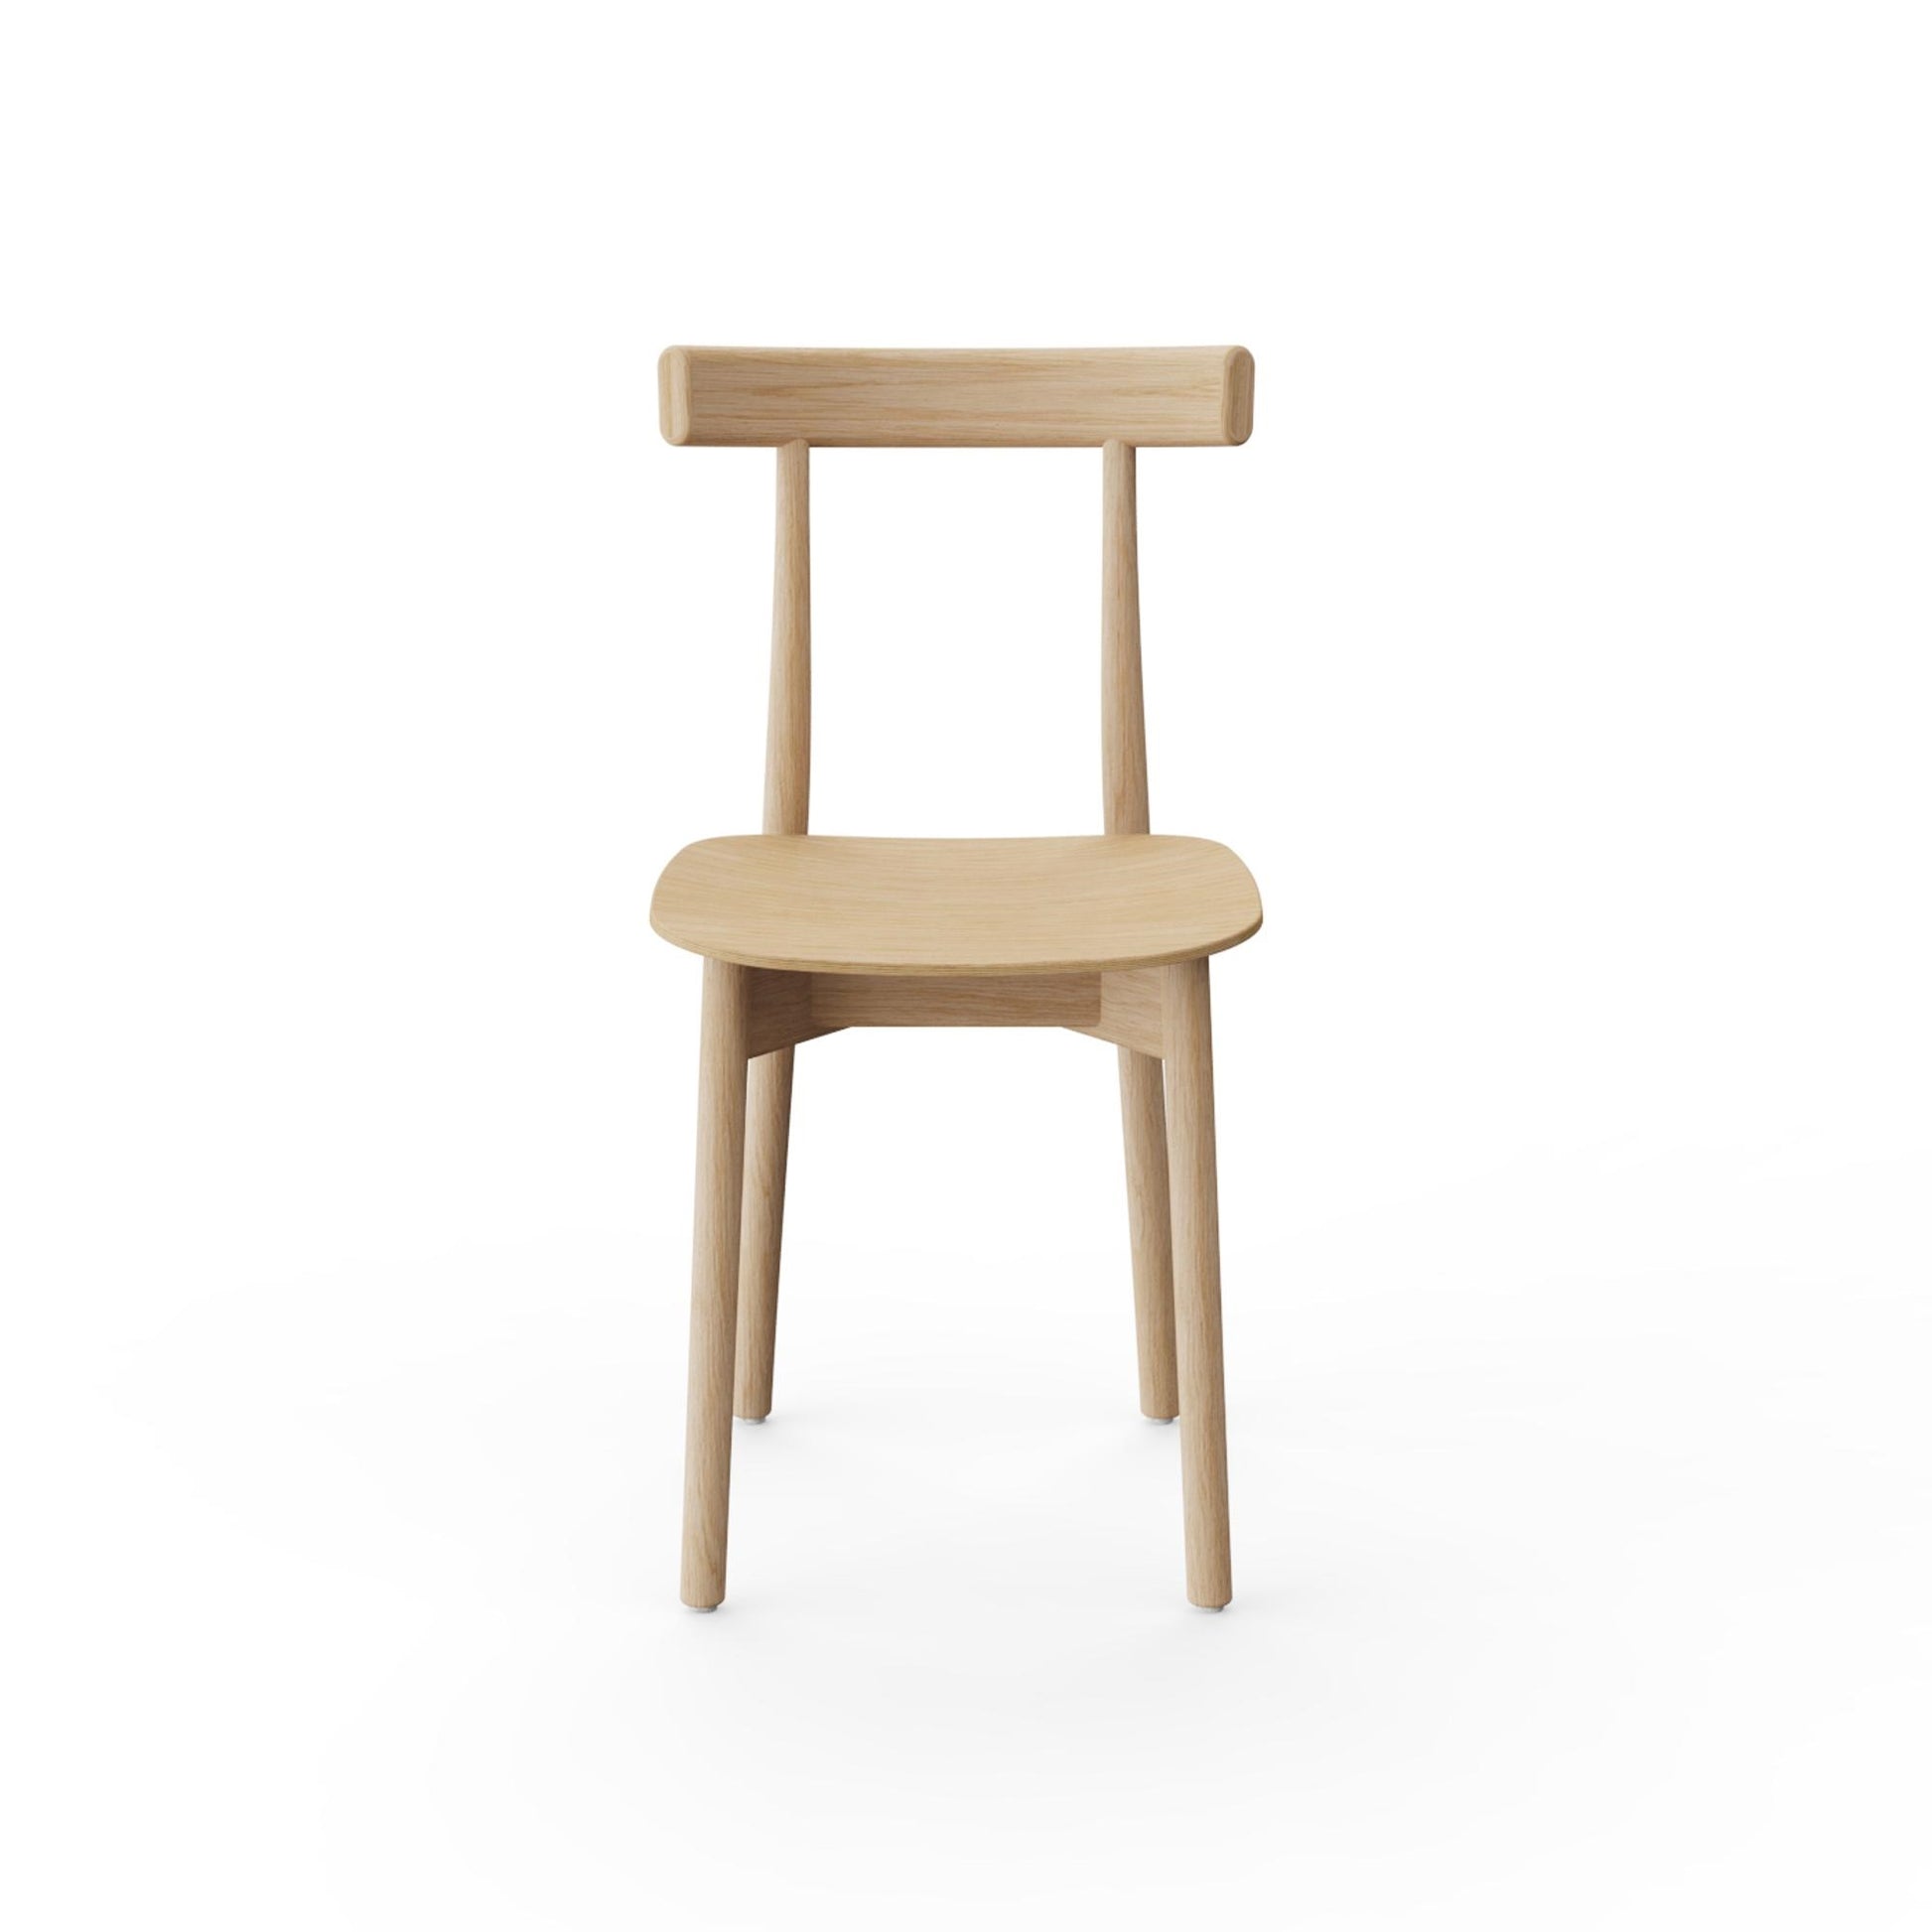 Skinny Wooden Dining Chair by NINE #Natural Oak